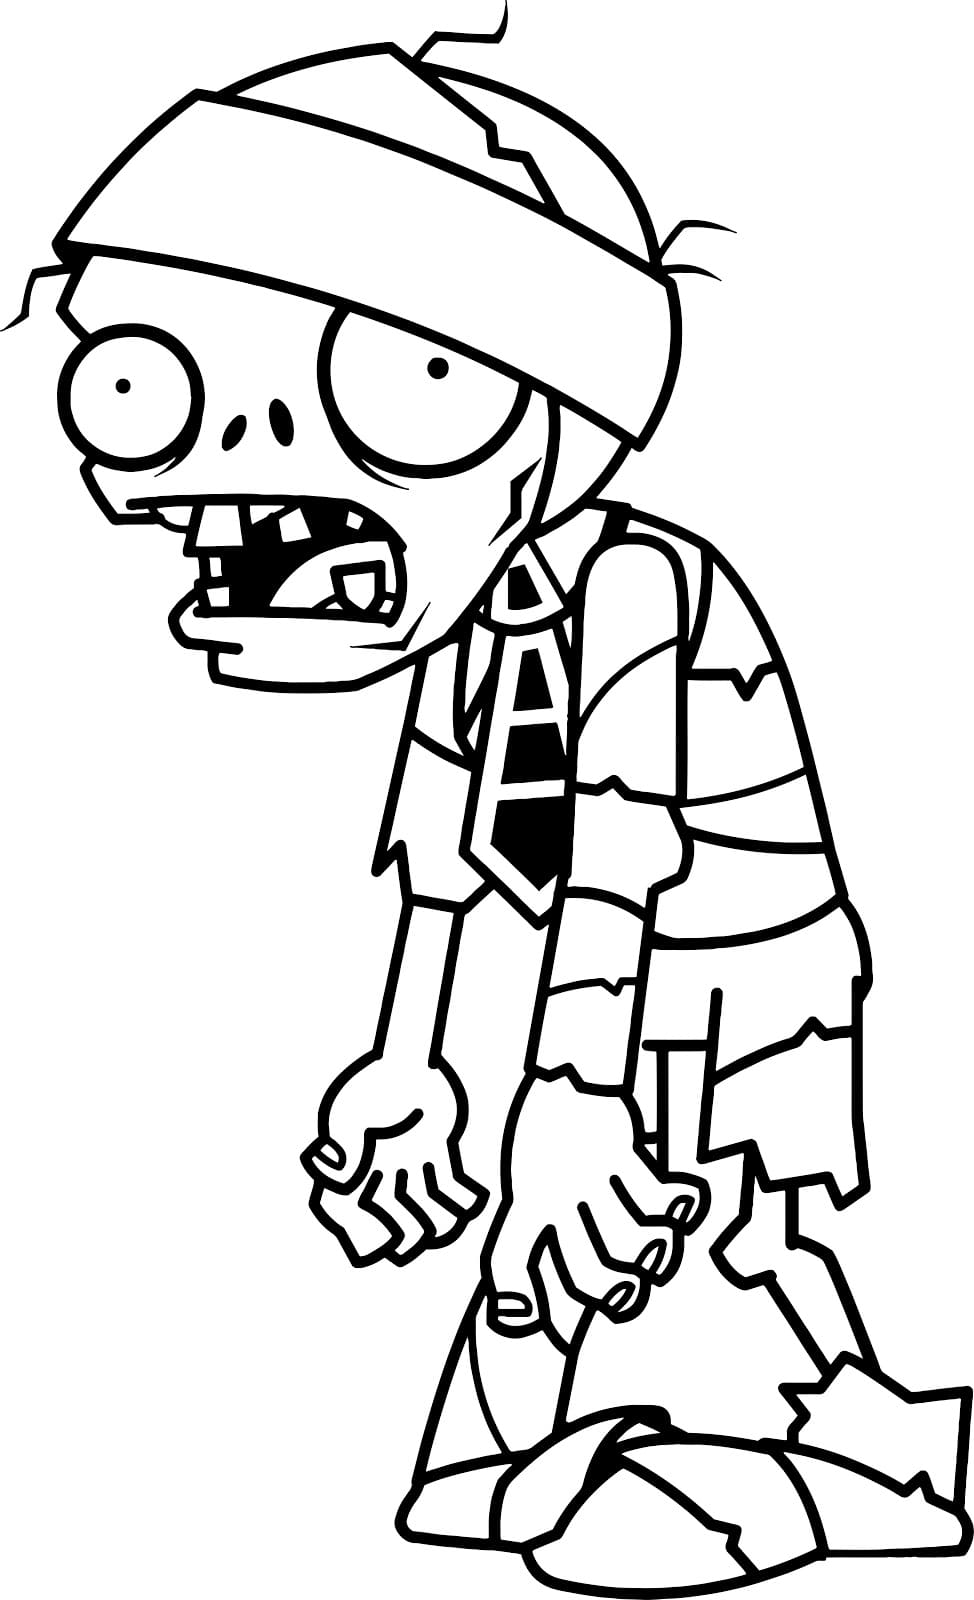 Coloring page Zombies Scary zombie